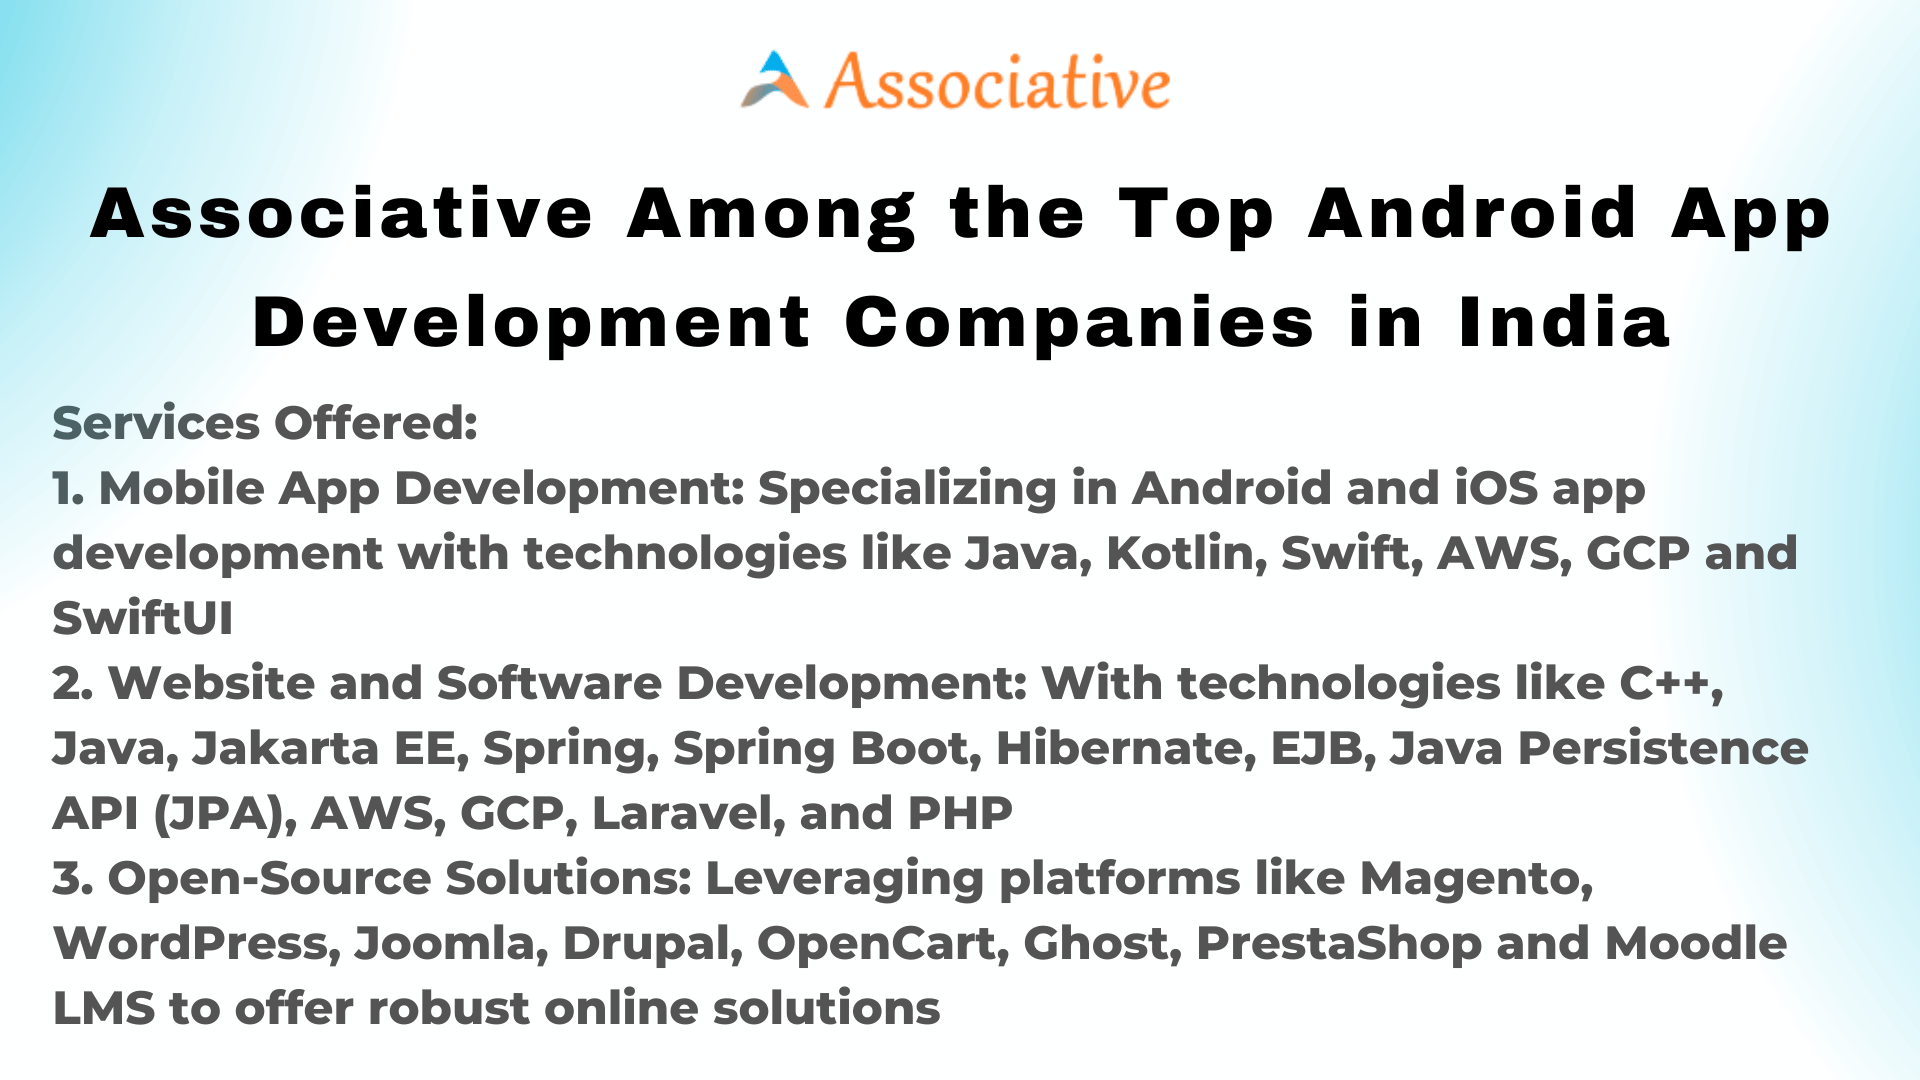 Associative Among the Top Android App Development Companies in India